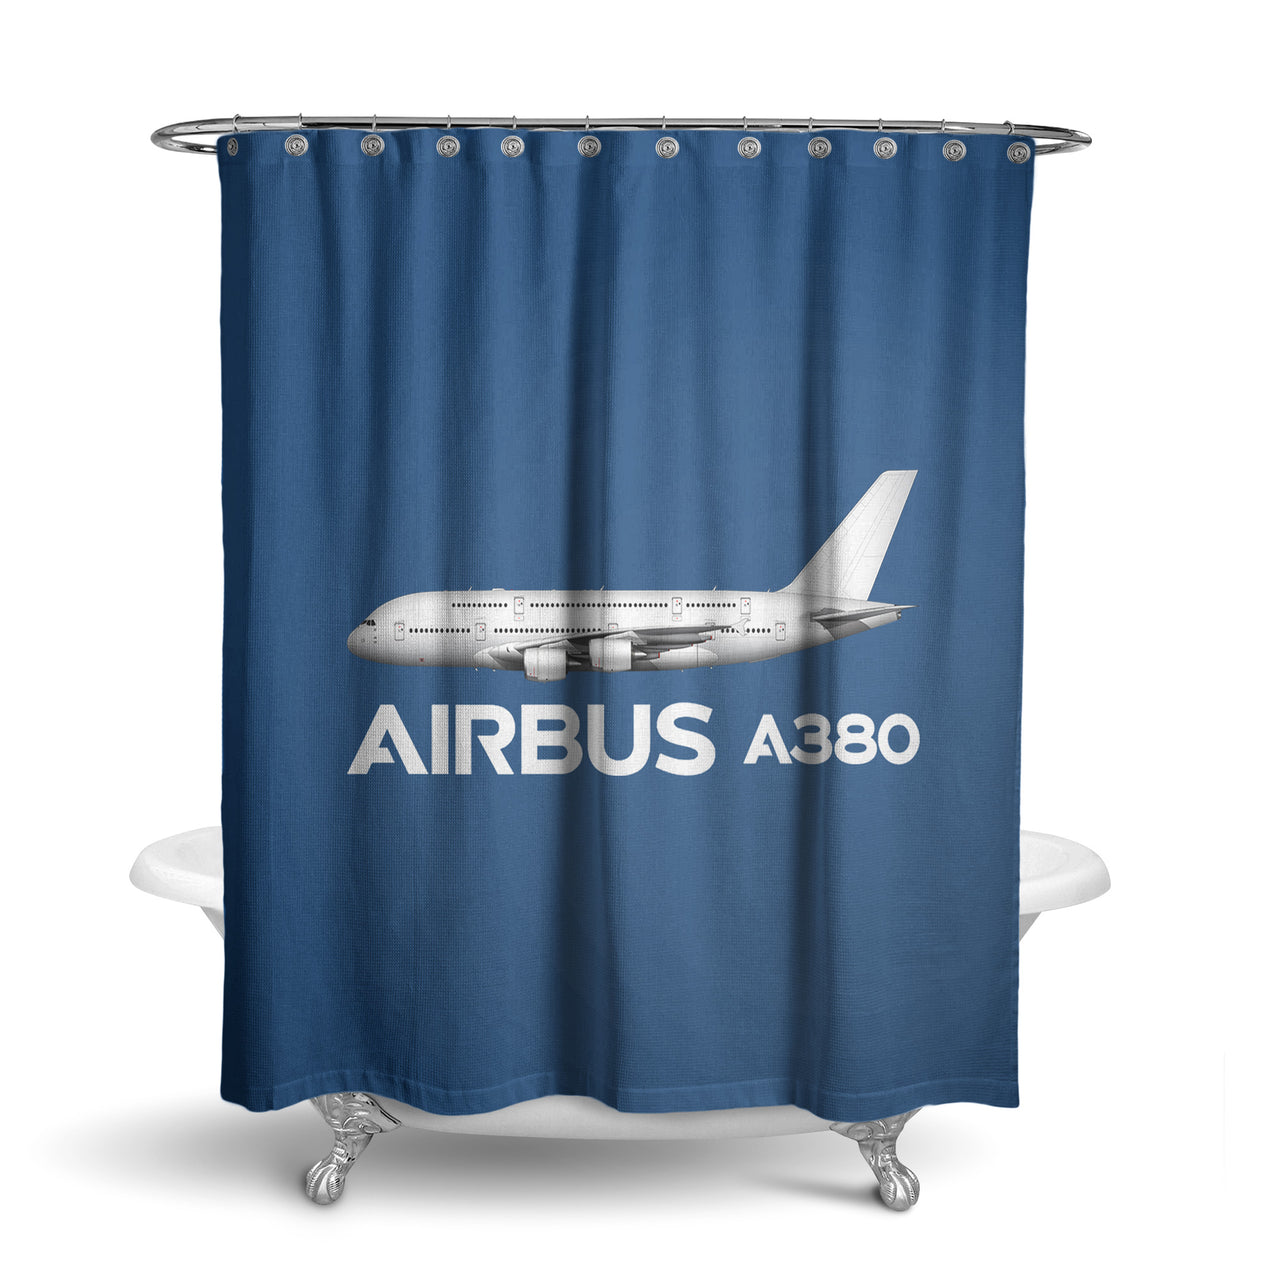 The Airbus A380 Designed Shower Curtains